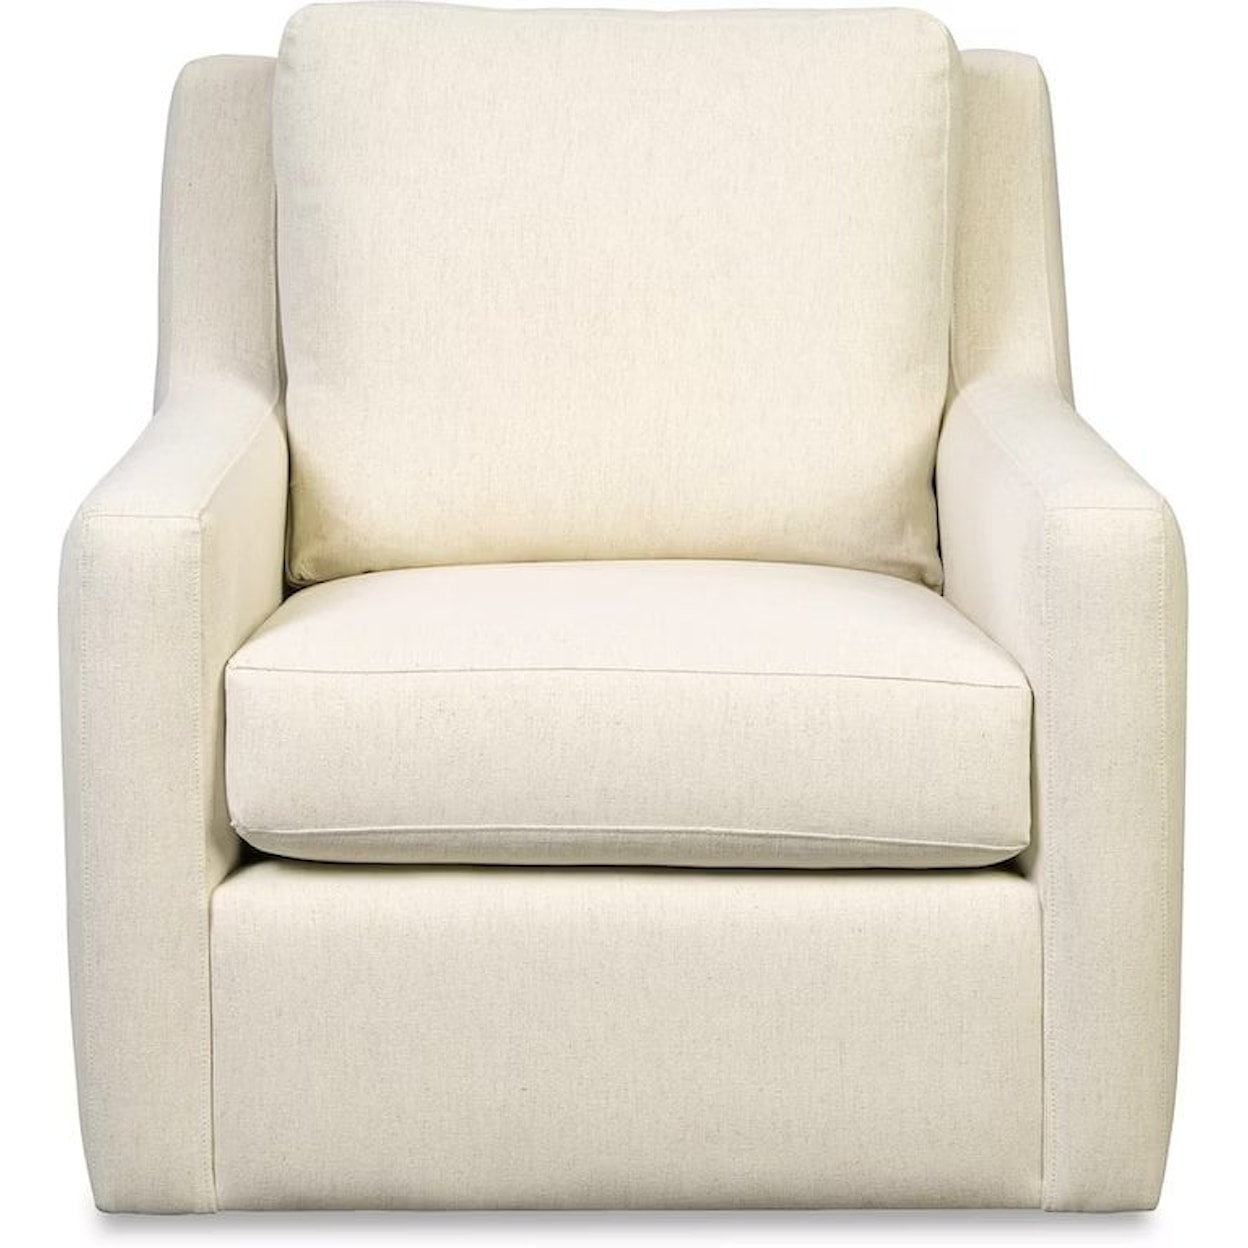 Hickory Craft 072510 Swivel Chair